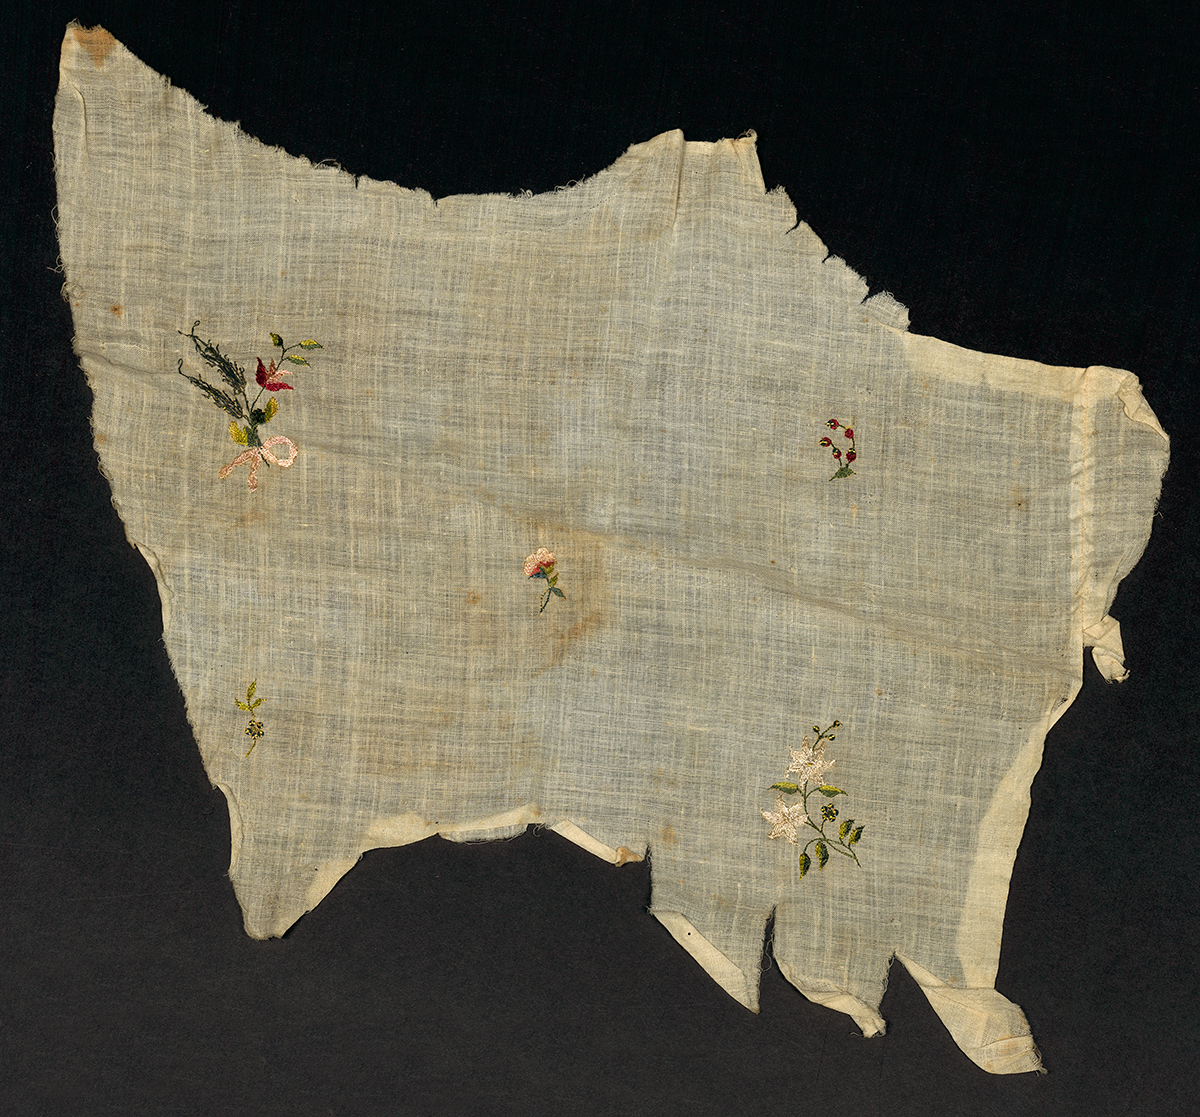 Textiles (Clothing) - Textile fragment, embroidered